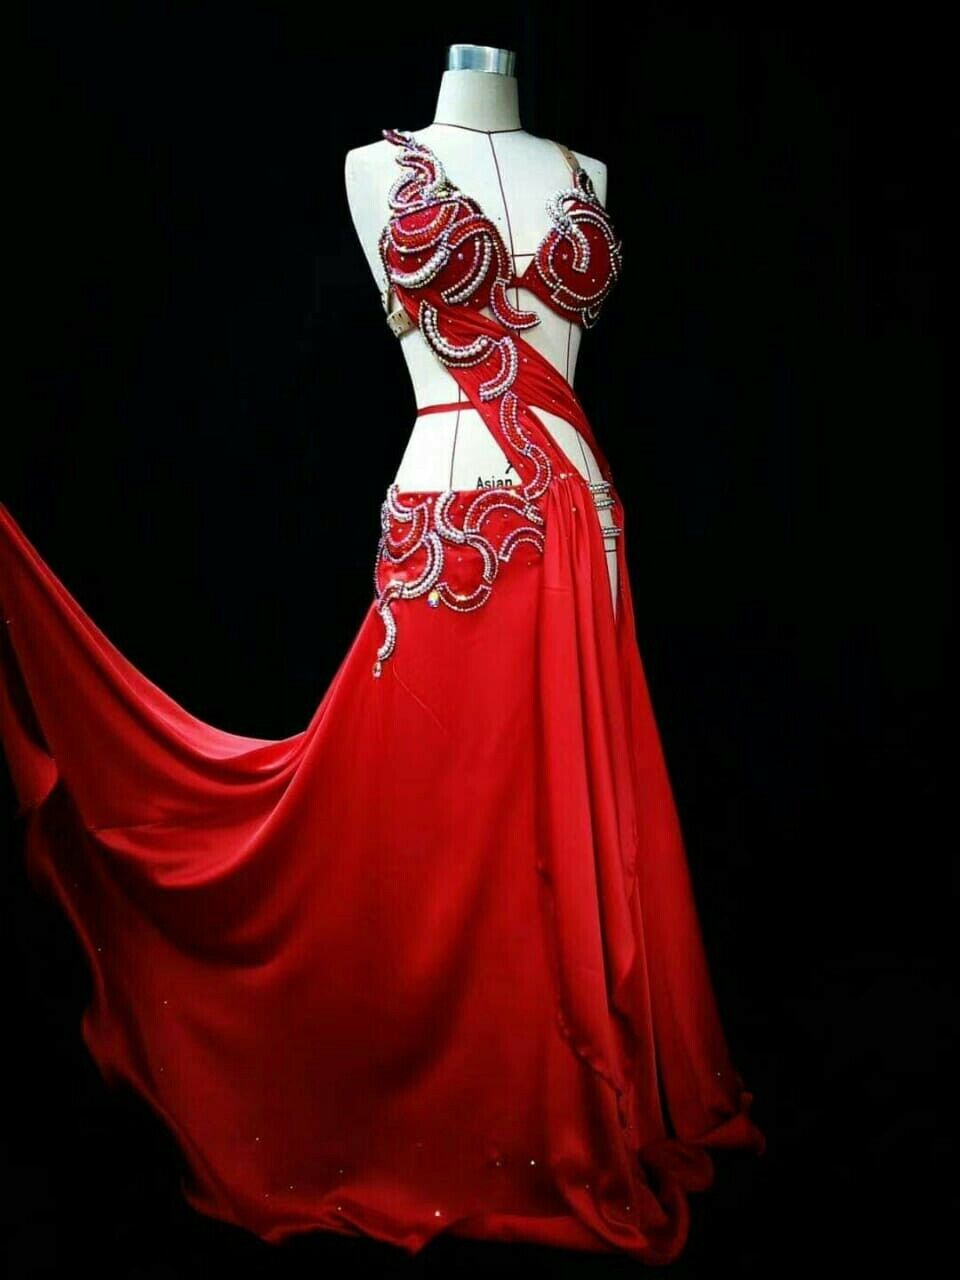 Egyptian professional belly dance costume 78％以上節約 爆買い made any color